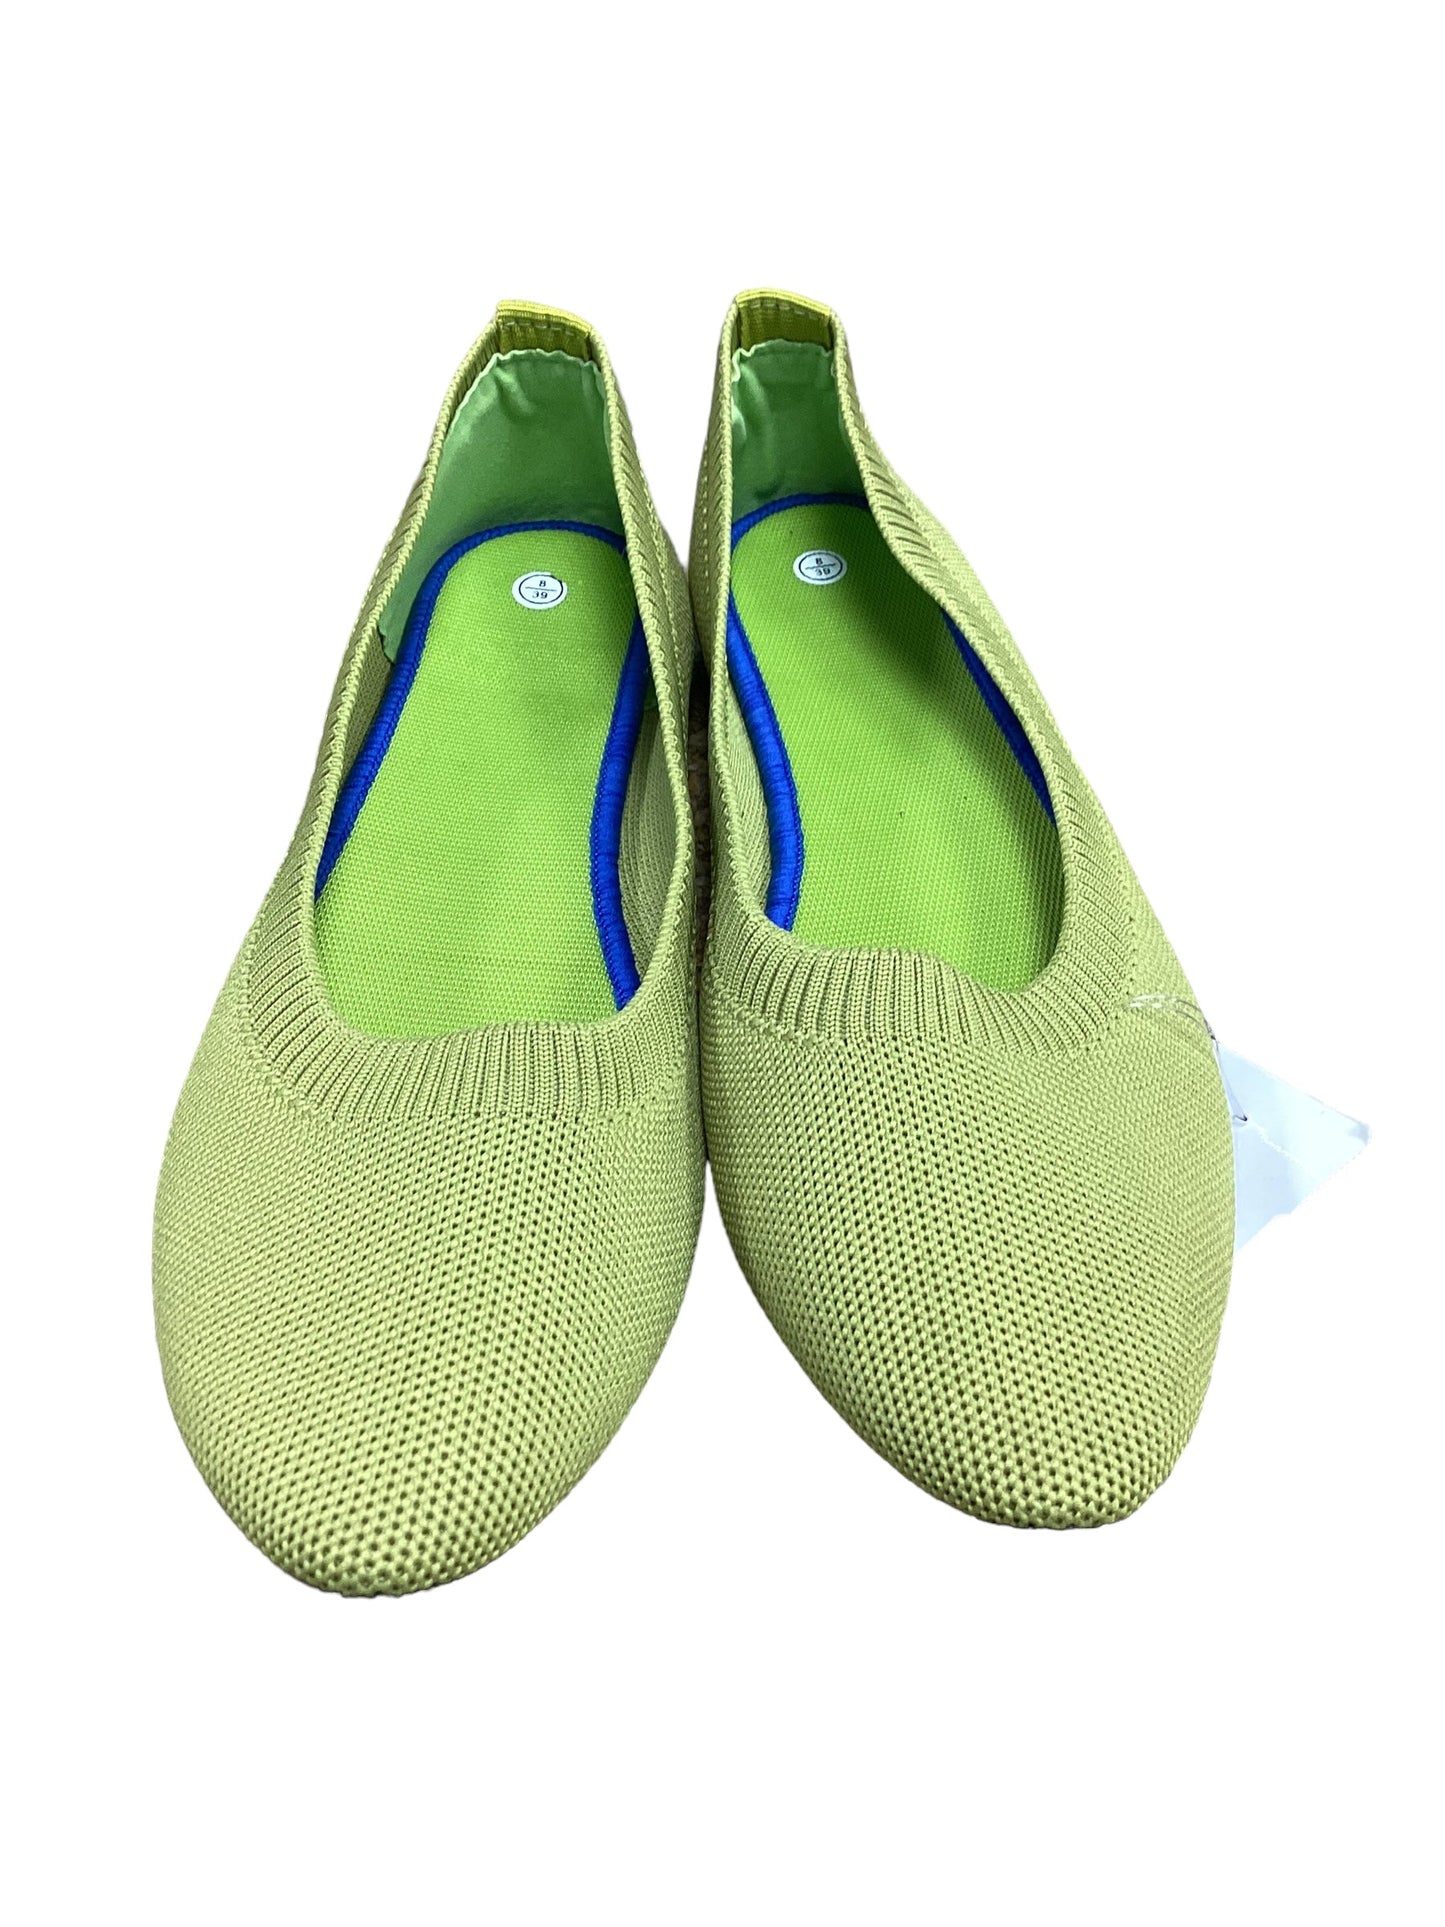 Green Shoes Flats Clothes Mentor, Size 8